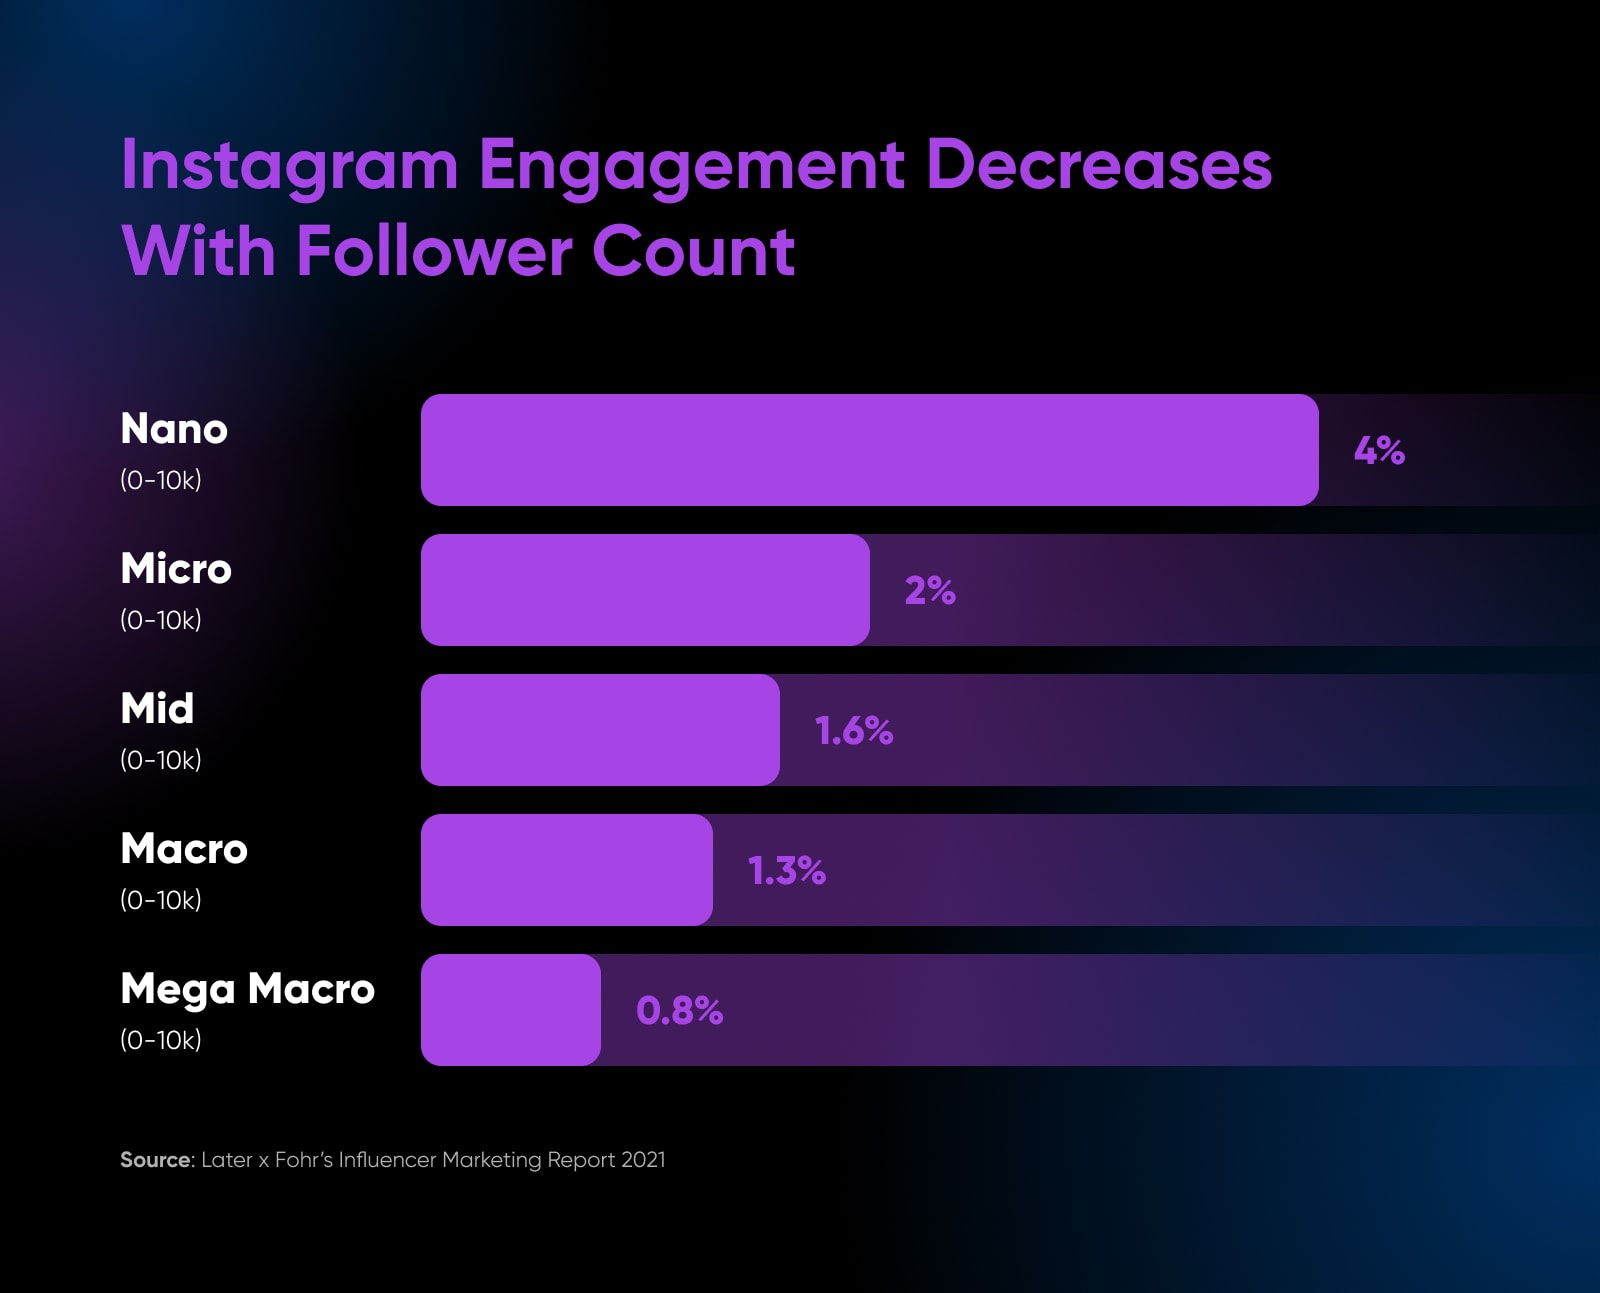 Instagram engagement decreases with follower count